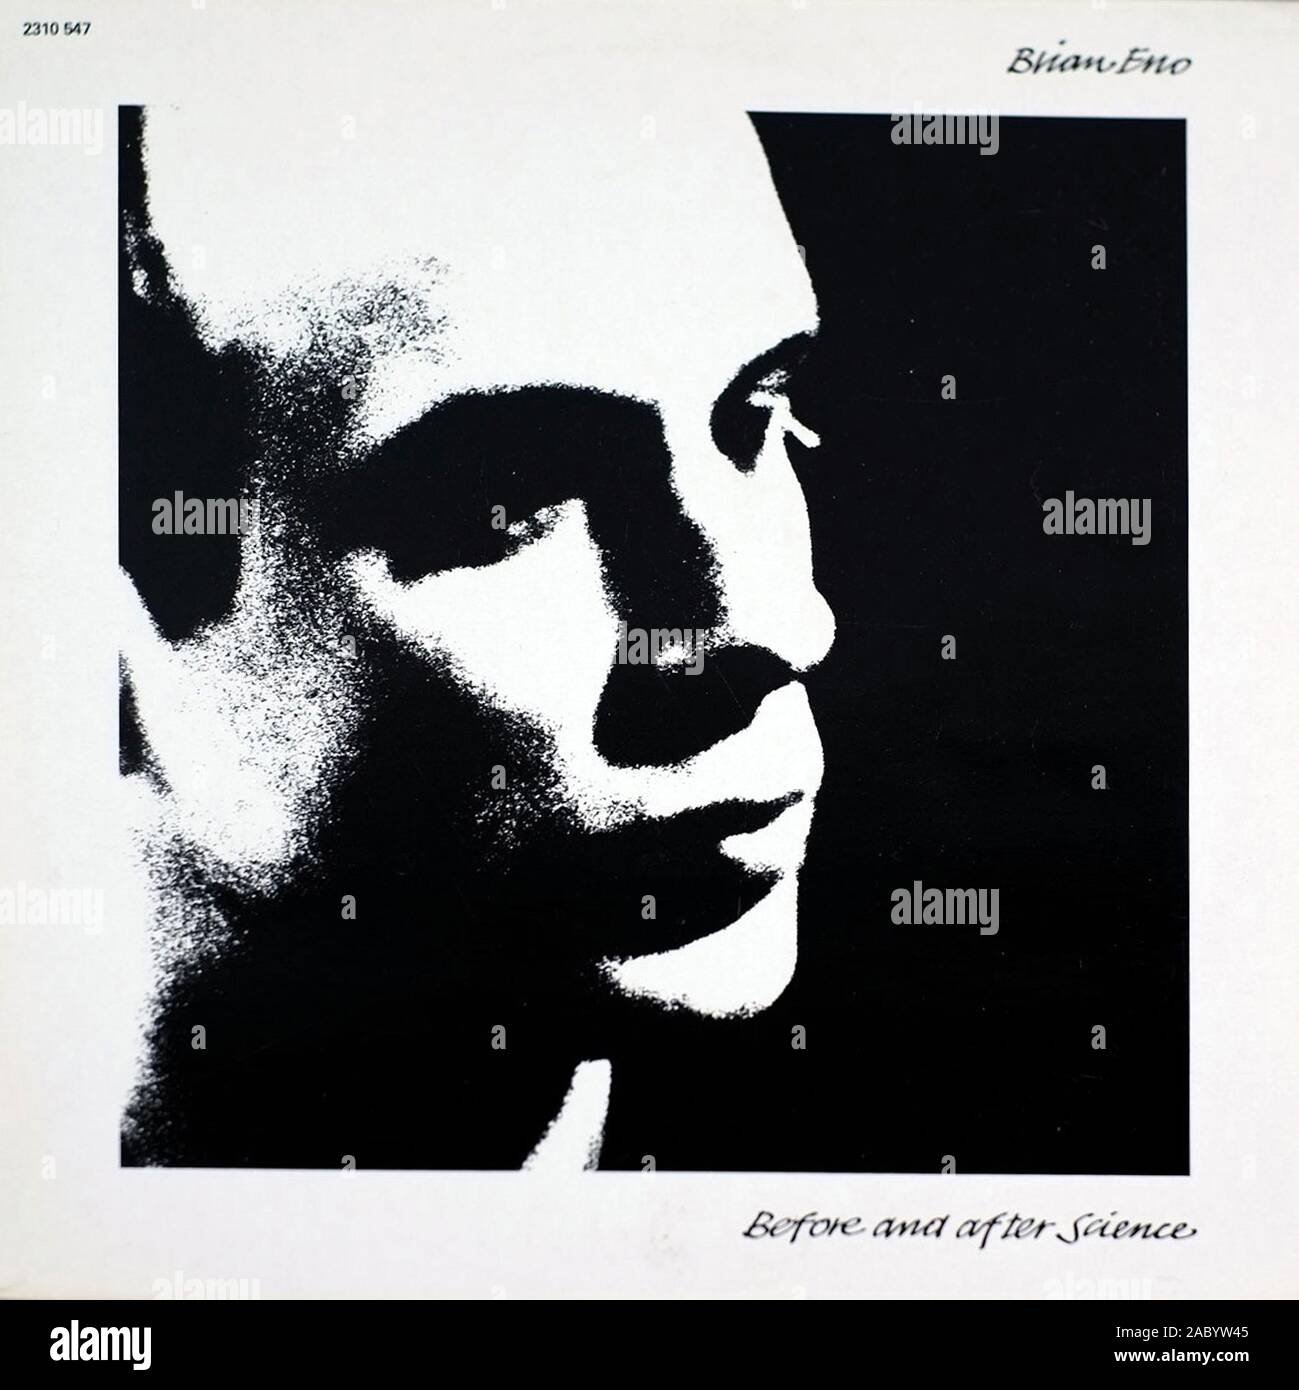 Brian Eno Before and after Science - Vintage vinyl album cover Stock Photo